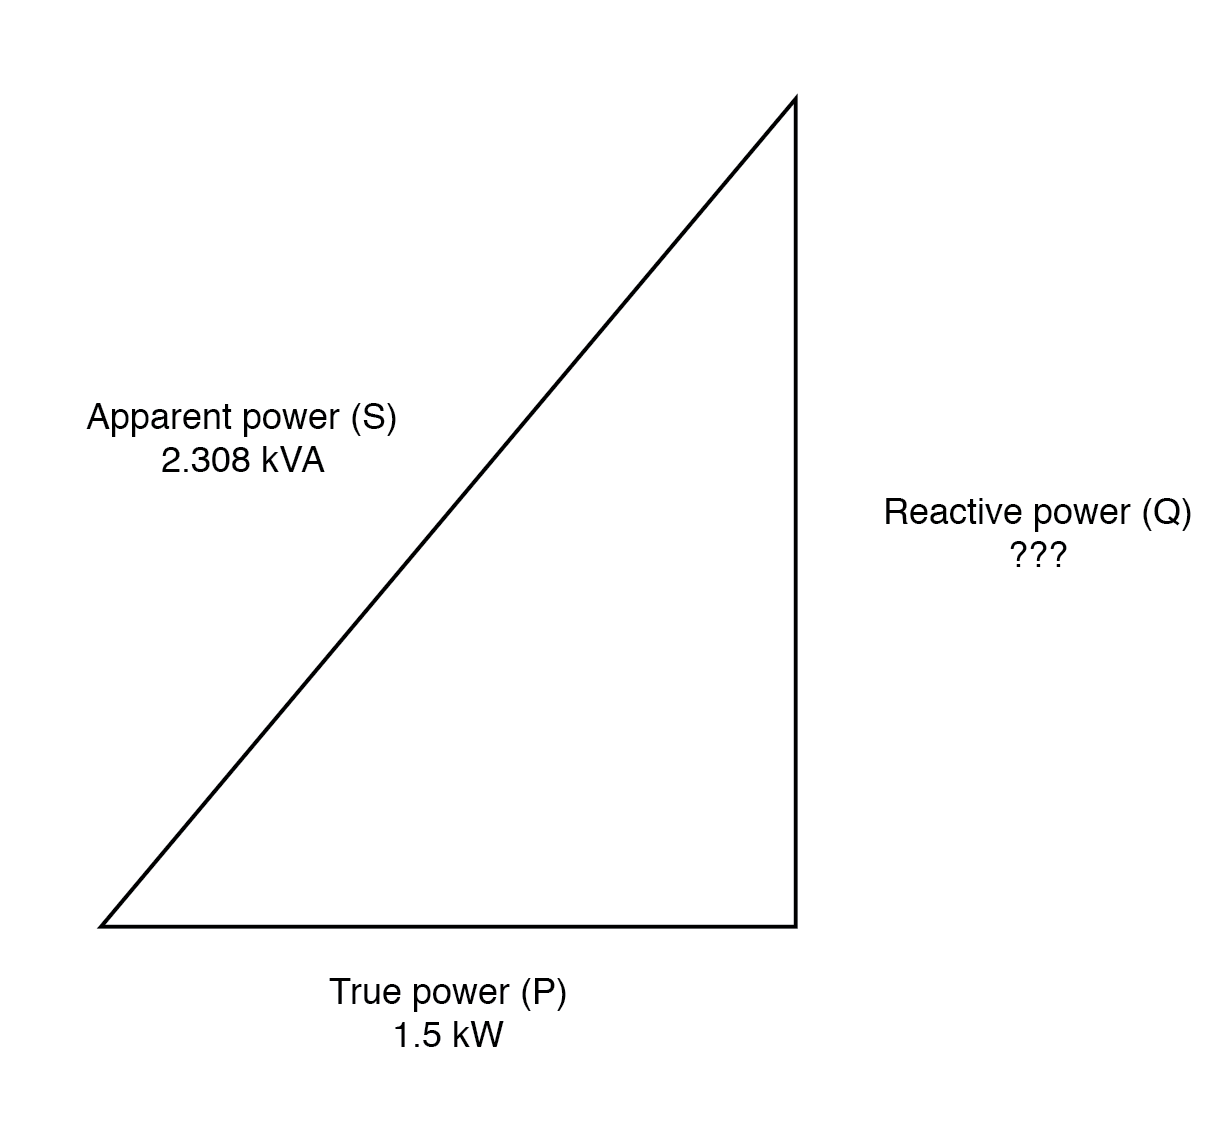 Reactive power may be calculated from true power and apparent power.